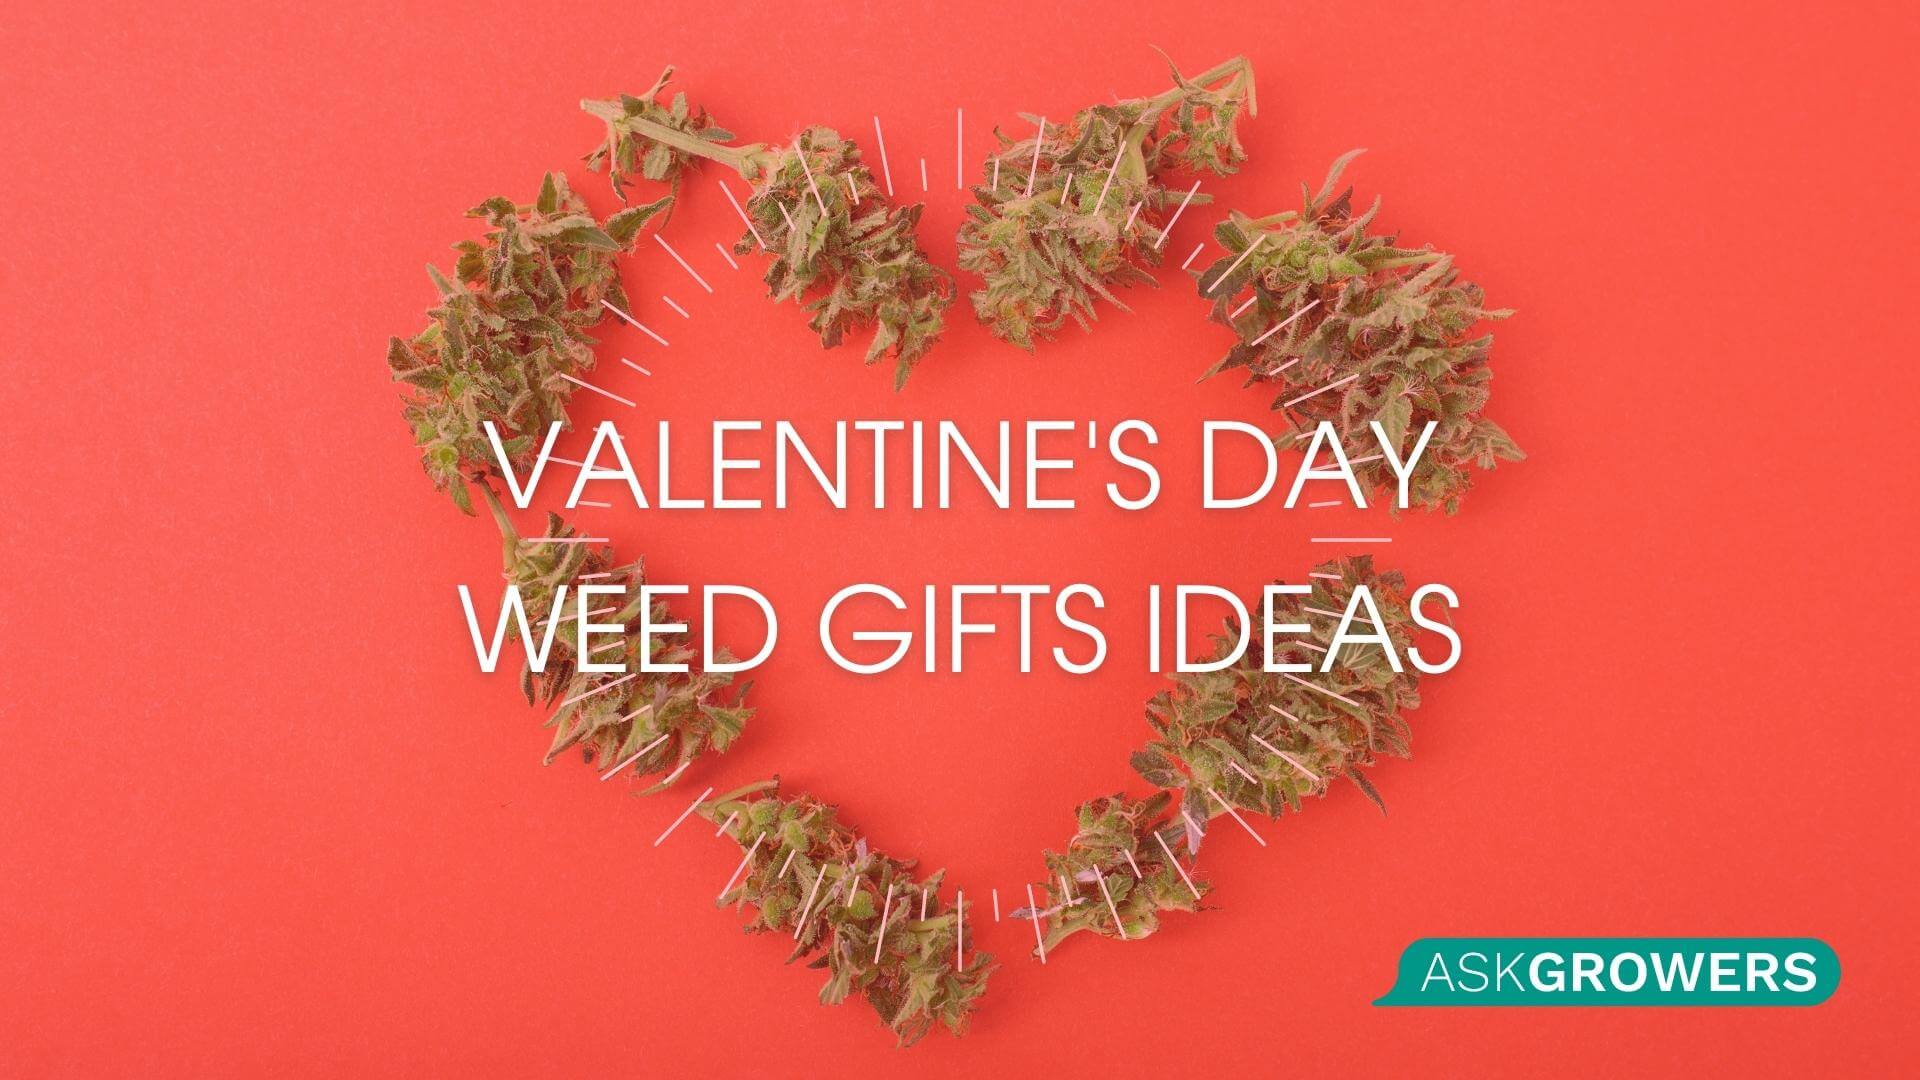 Valentine's Day Weed Gifts Ideas